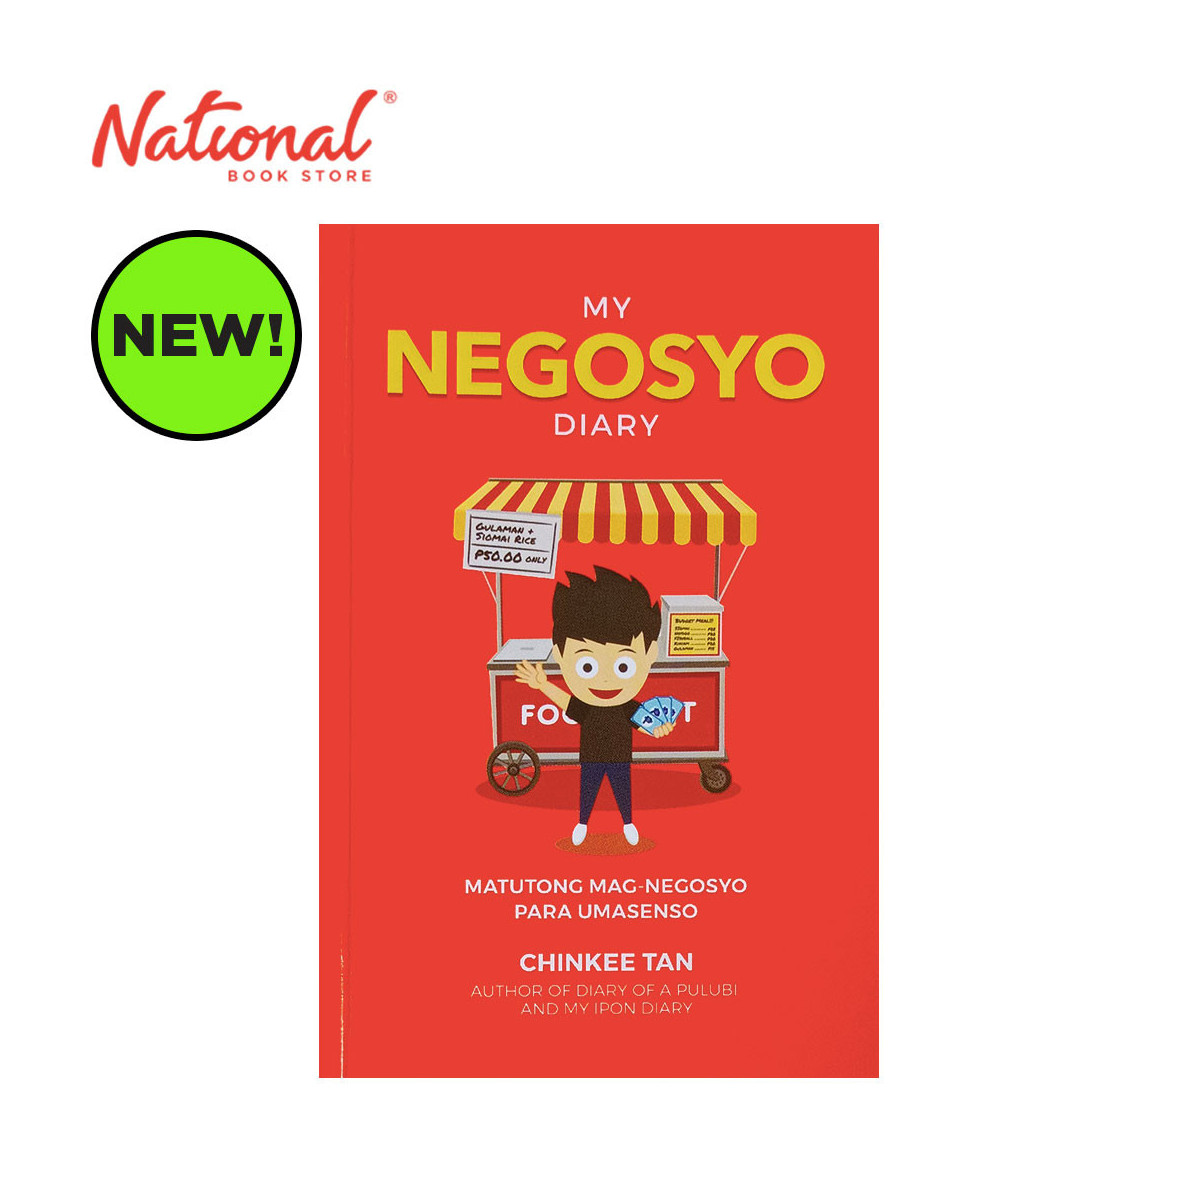 My Negosyo Diary by Chinkee Tan - Trade Paperback - Finance & Investing